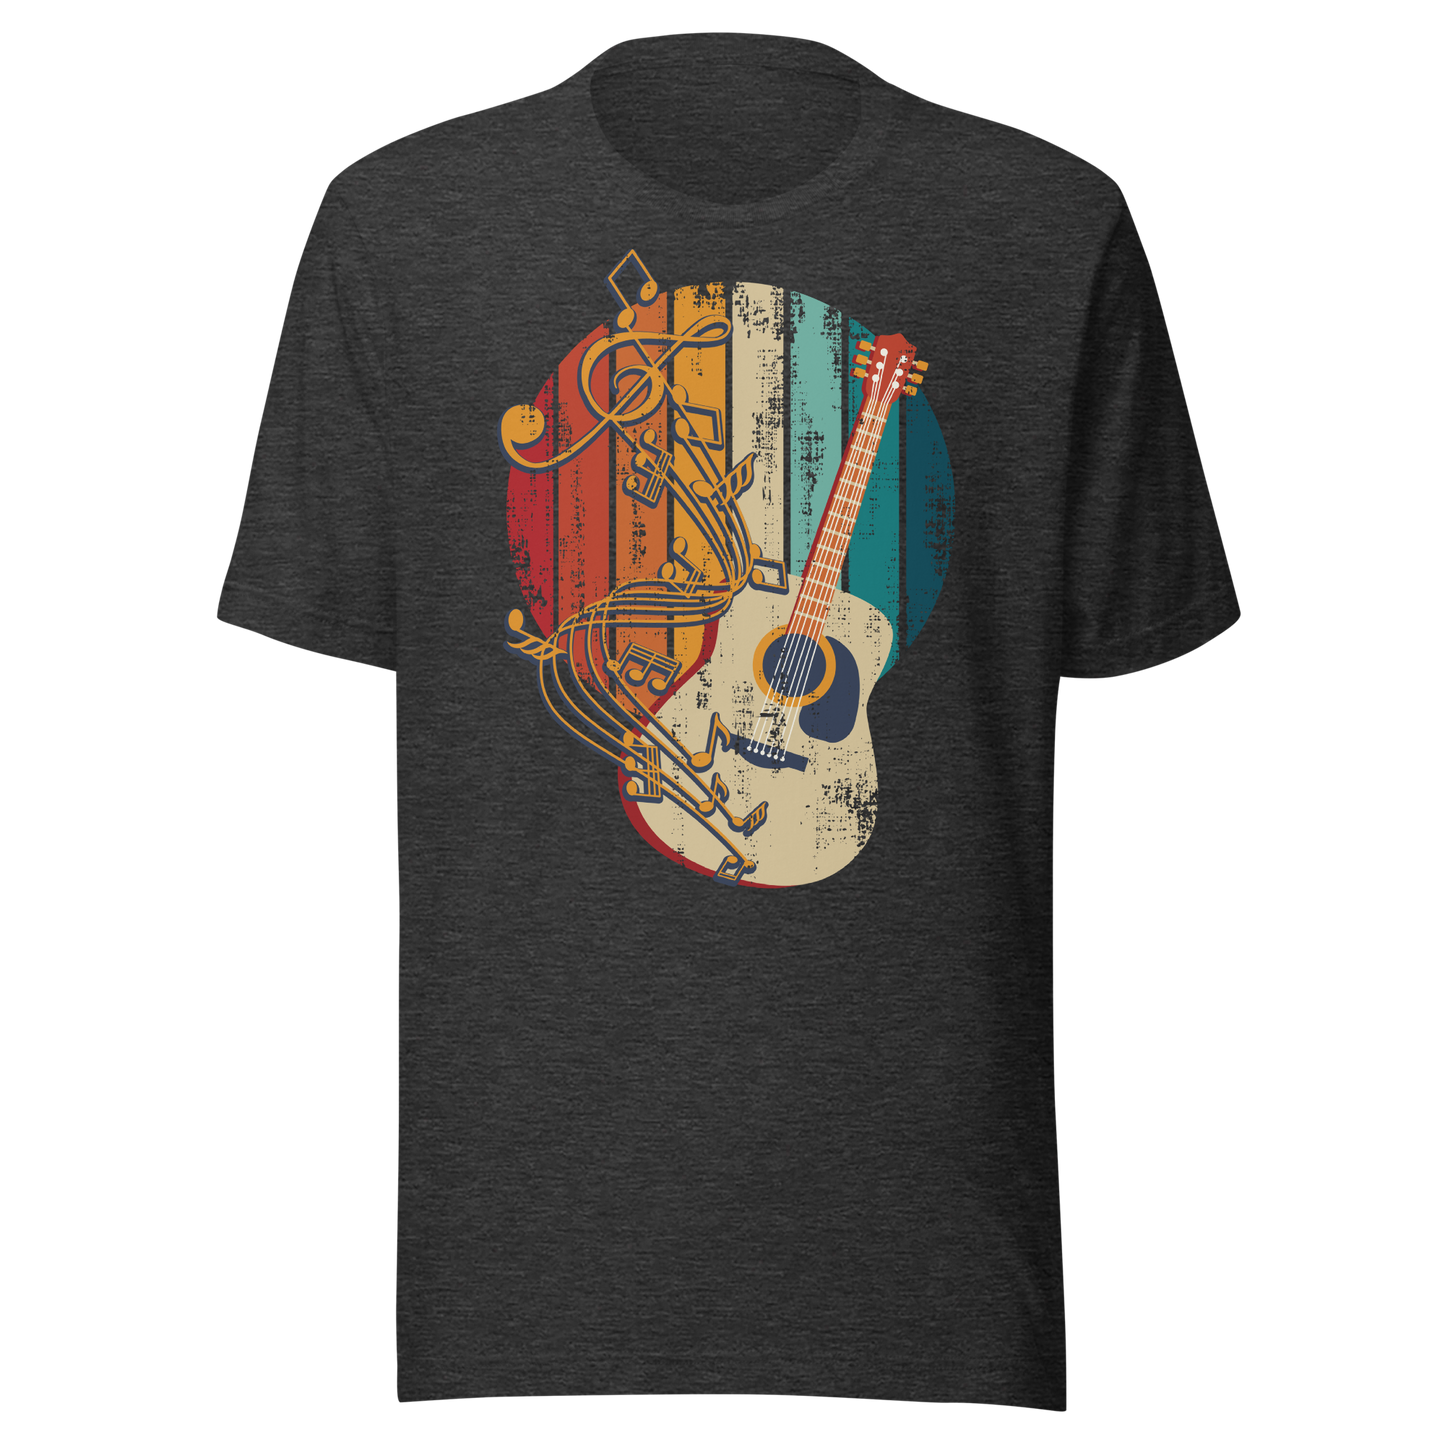 Retro Unisex T-Shirt - Classical Guitar and Notes Design Ghost Front